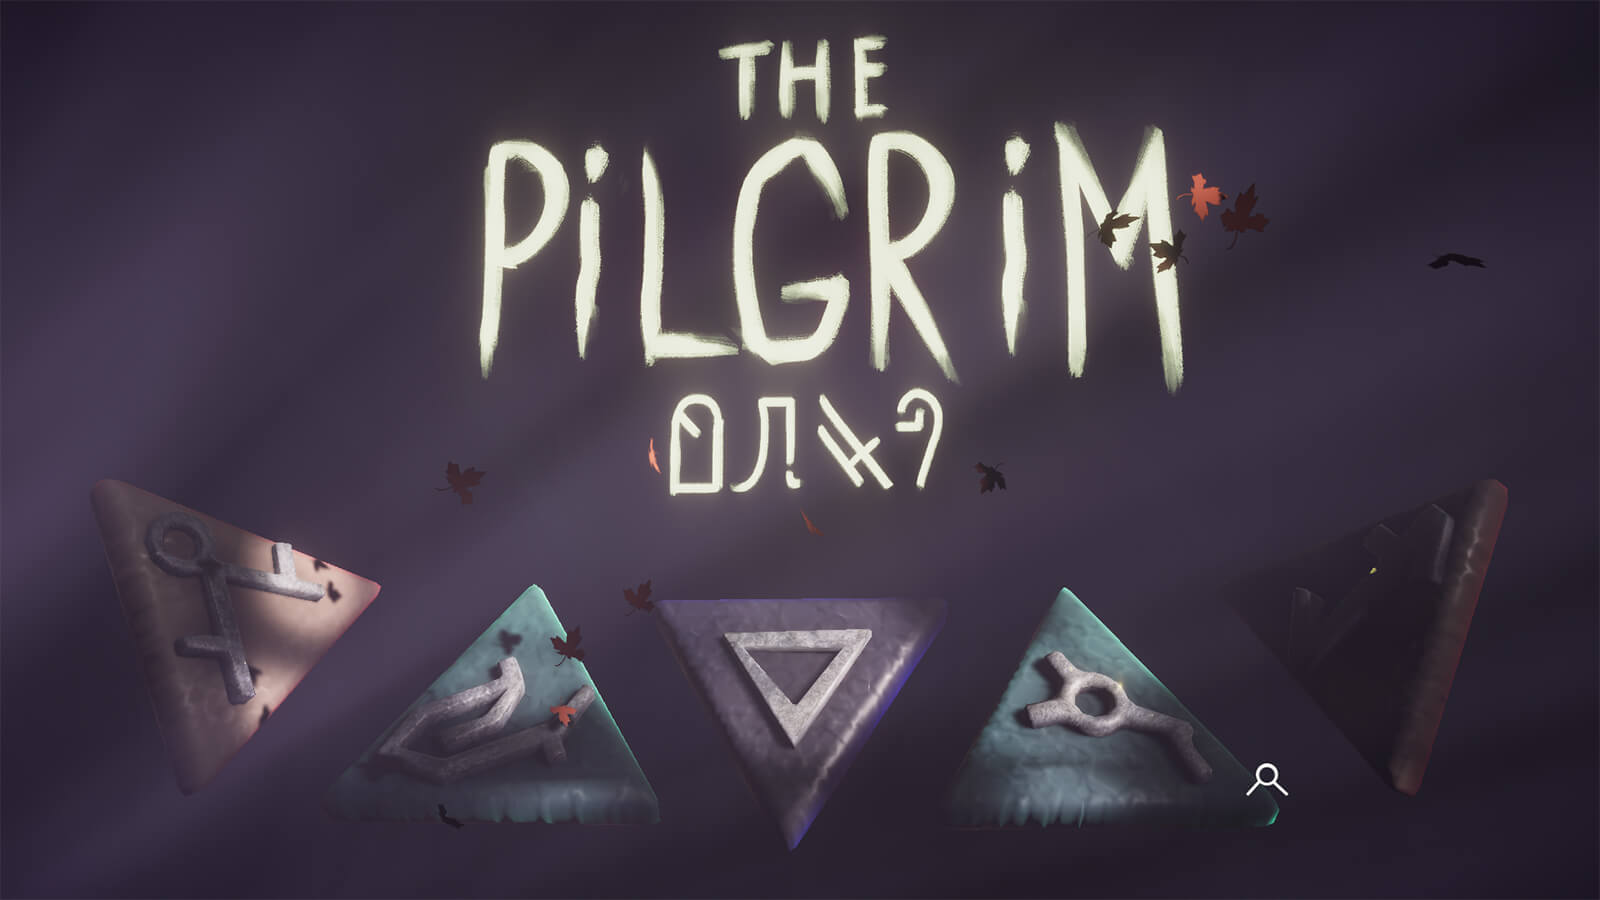 The menu screen for The Pilgrim, featuring many of the game’s runic puzzle symbols embossed on colored triangles. 